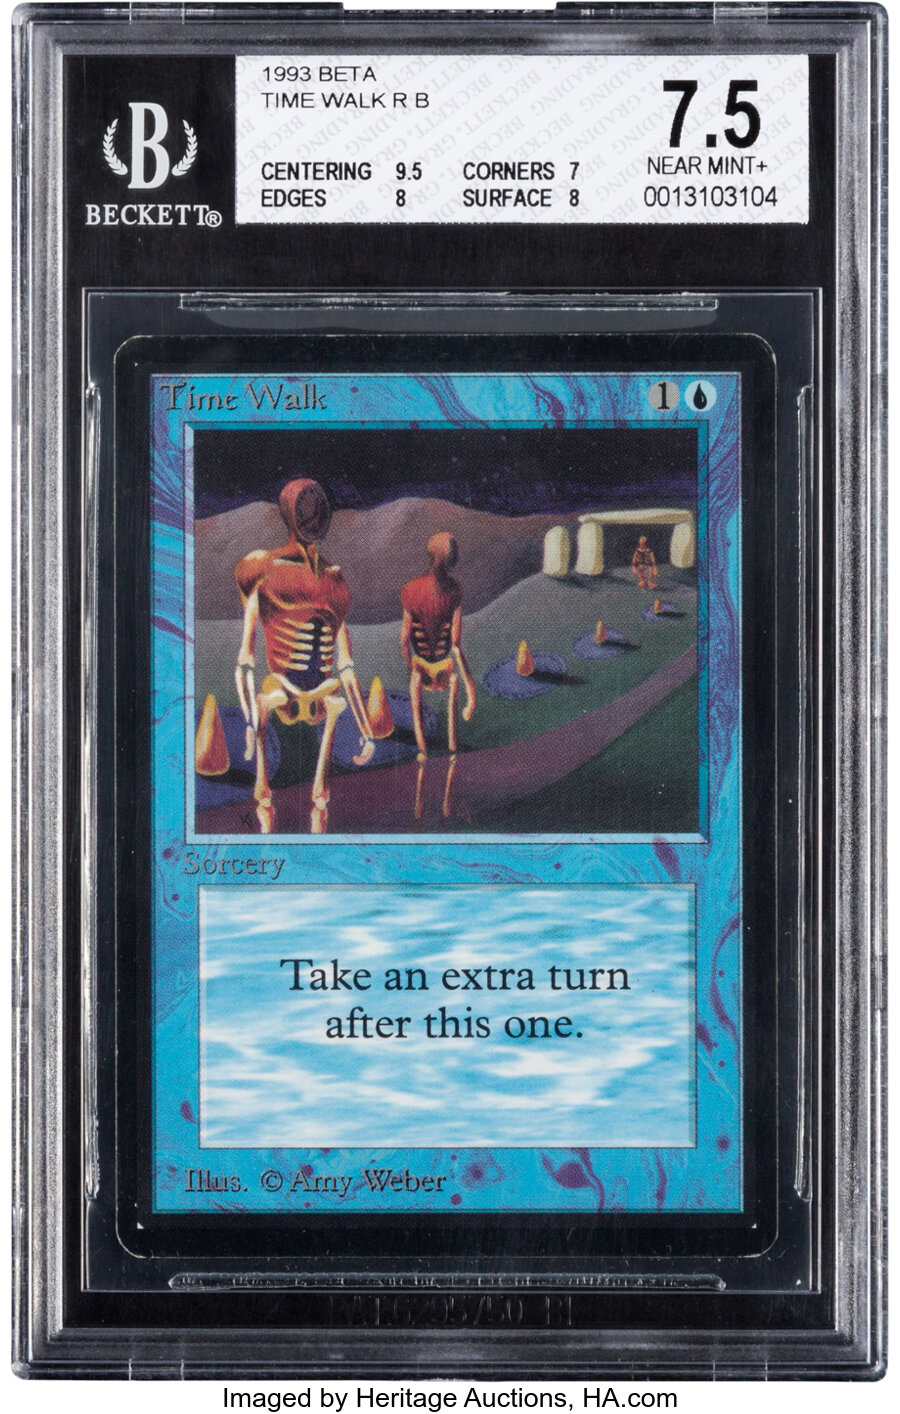 Magic: The Gathering Time Walk Beta Edition Trading Card (Wizards of the Coast, 1993) BGS NEAR MINT+ 7.5